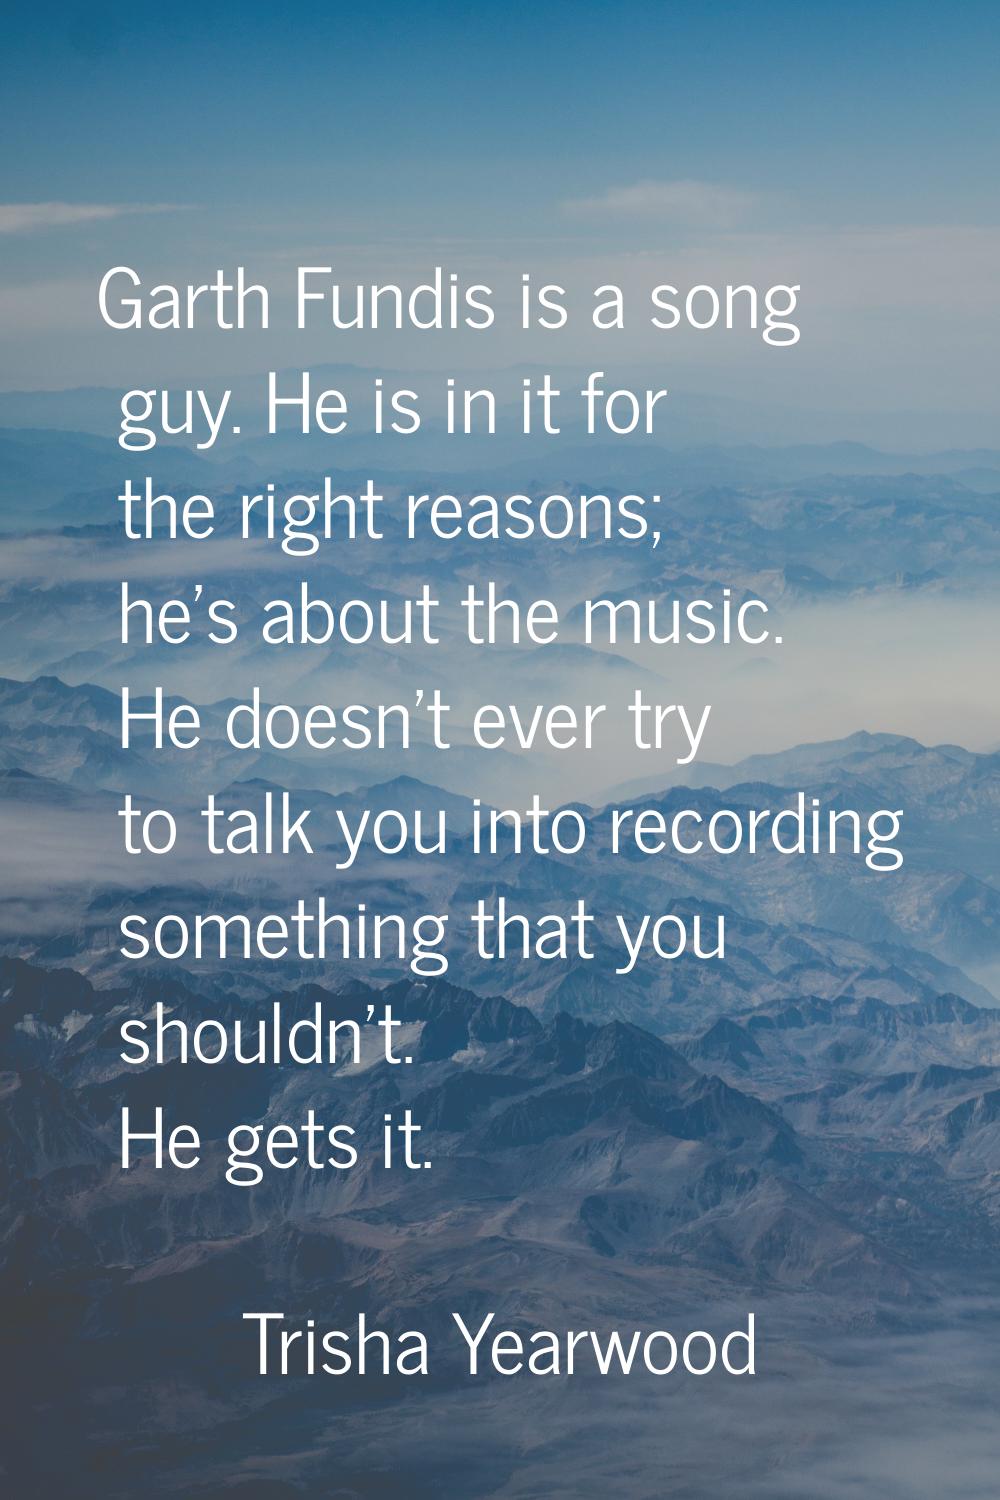 Garth Fundis is a song guy. He is in it for the right reasons; he's about the music. He doesn't eve